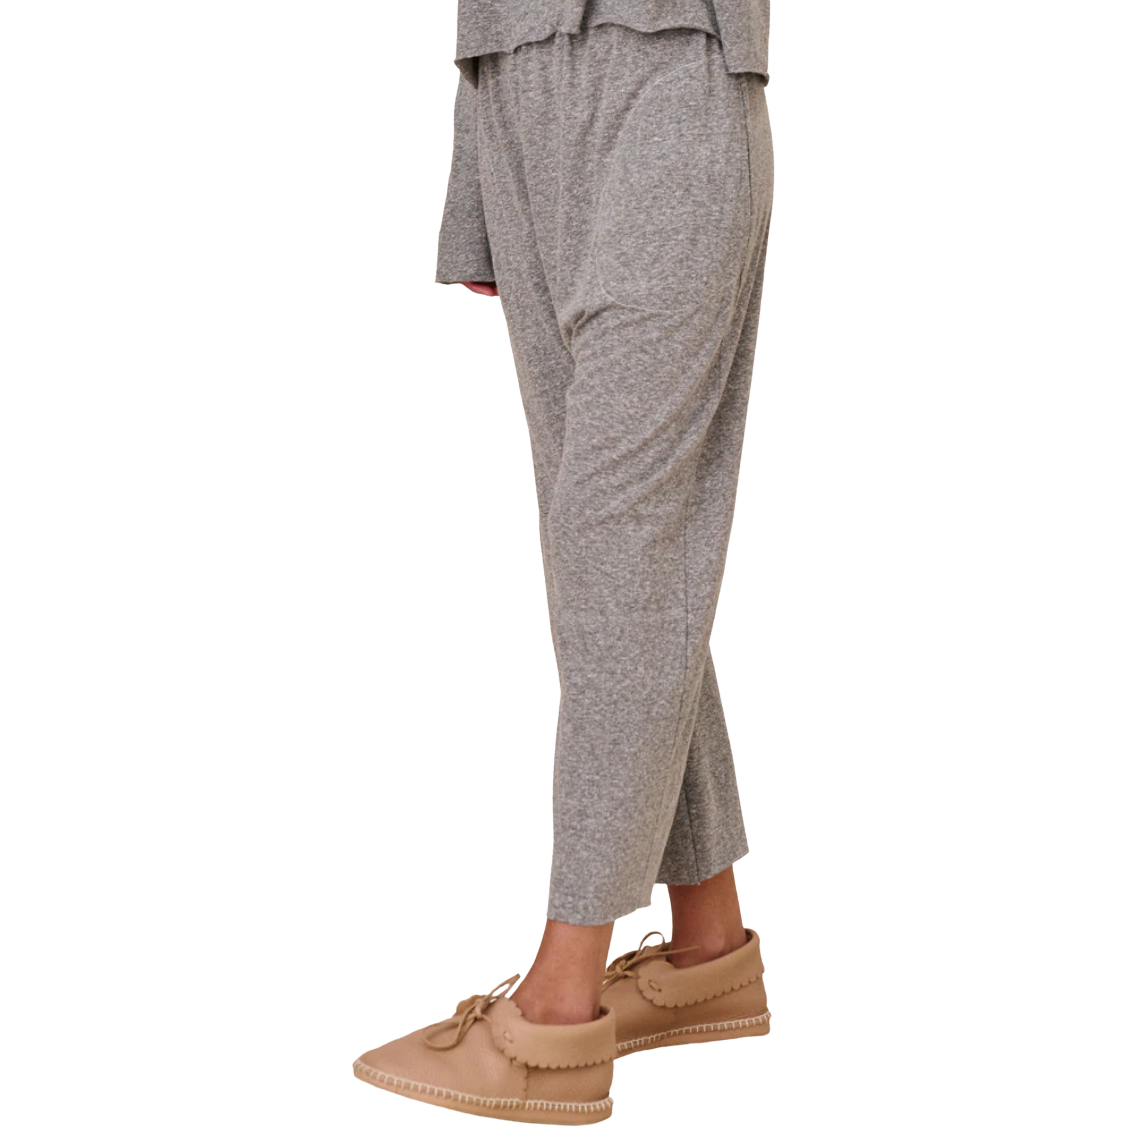 The GREAT Jersey Heather Grey Crop Pant